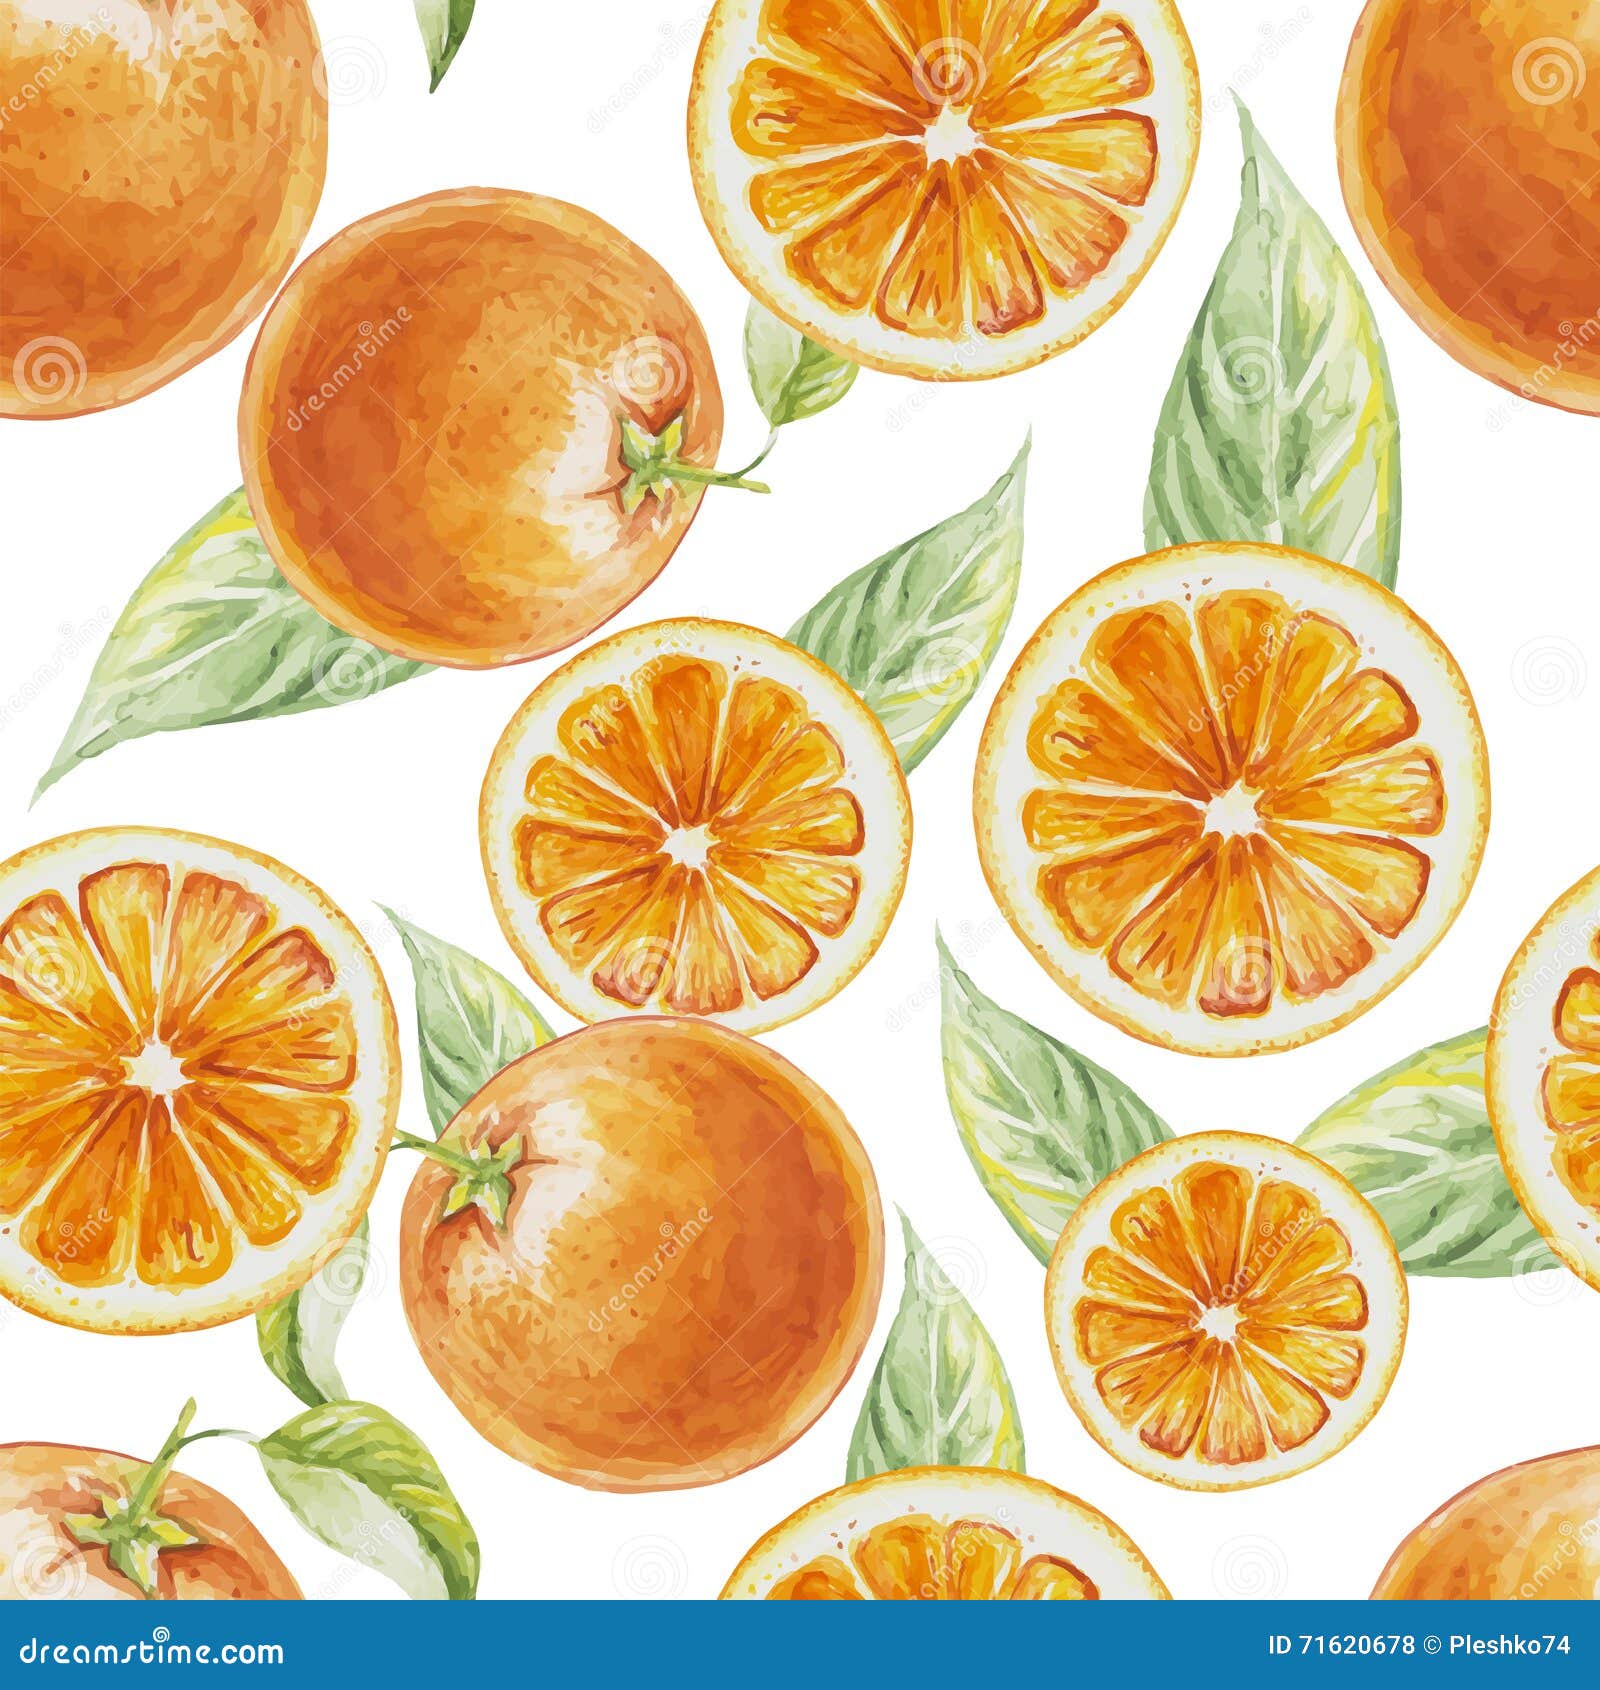 watercolor seamless pattern of orange fruit with leafs